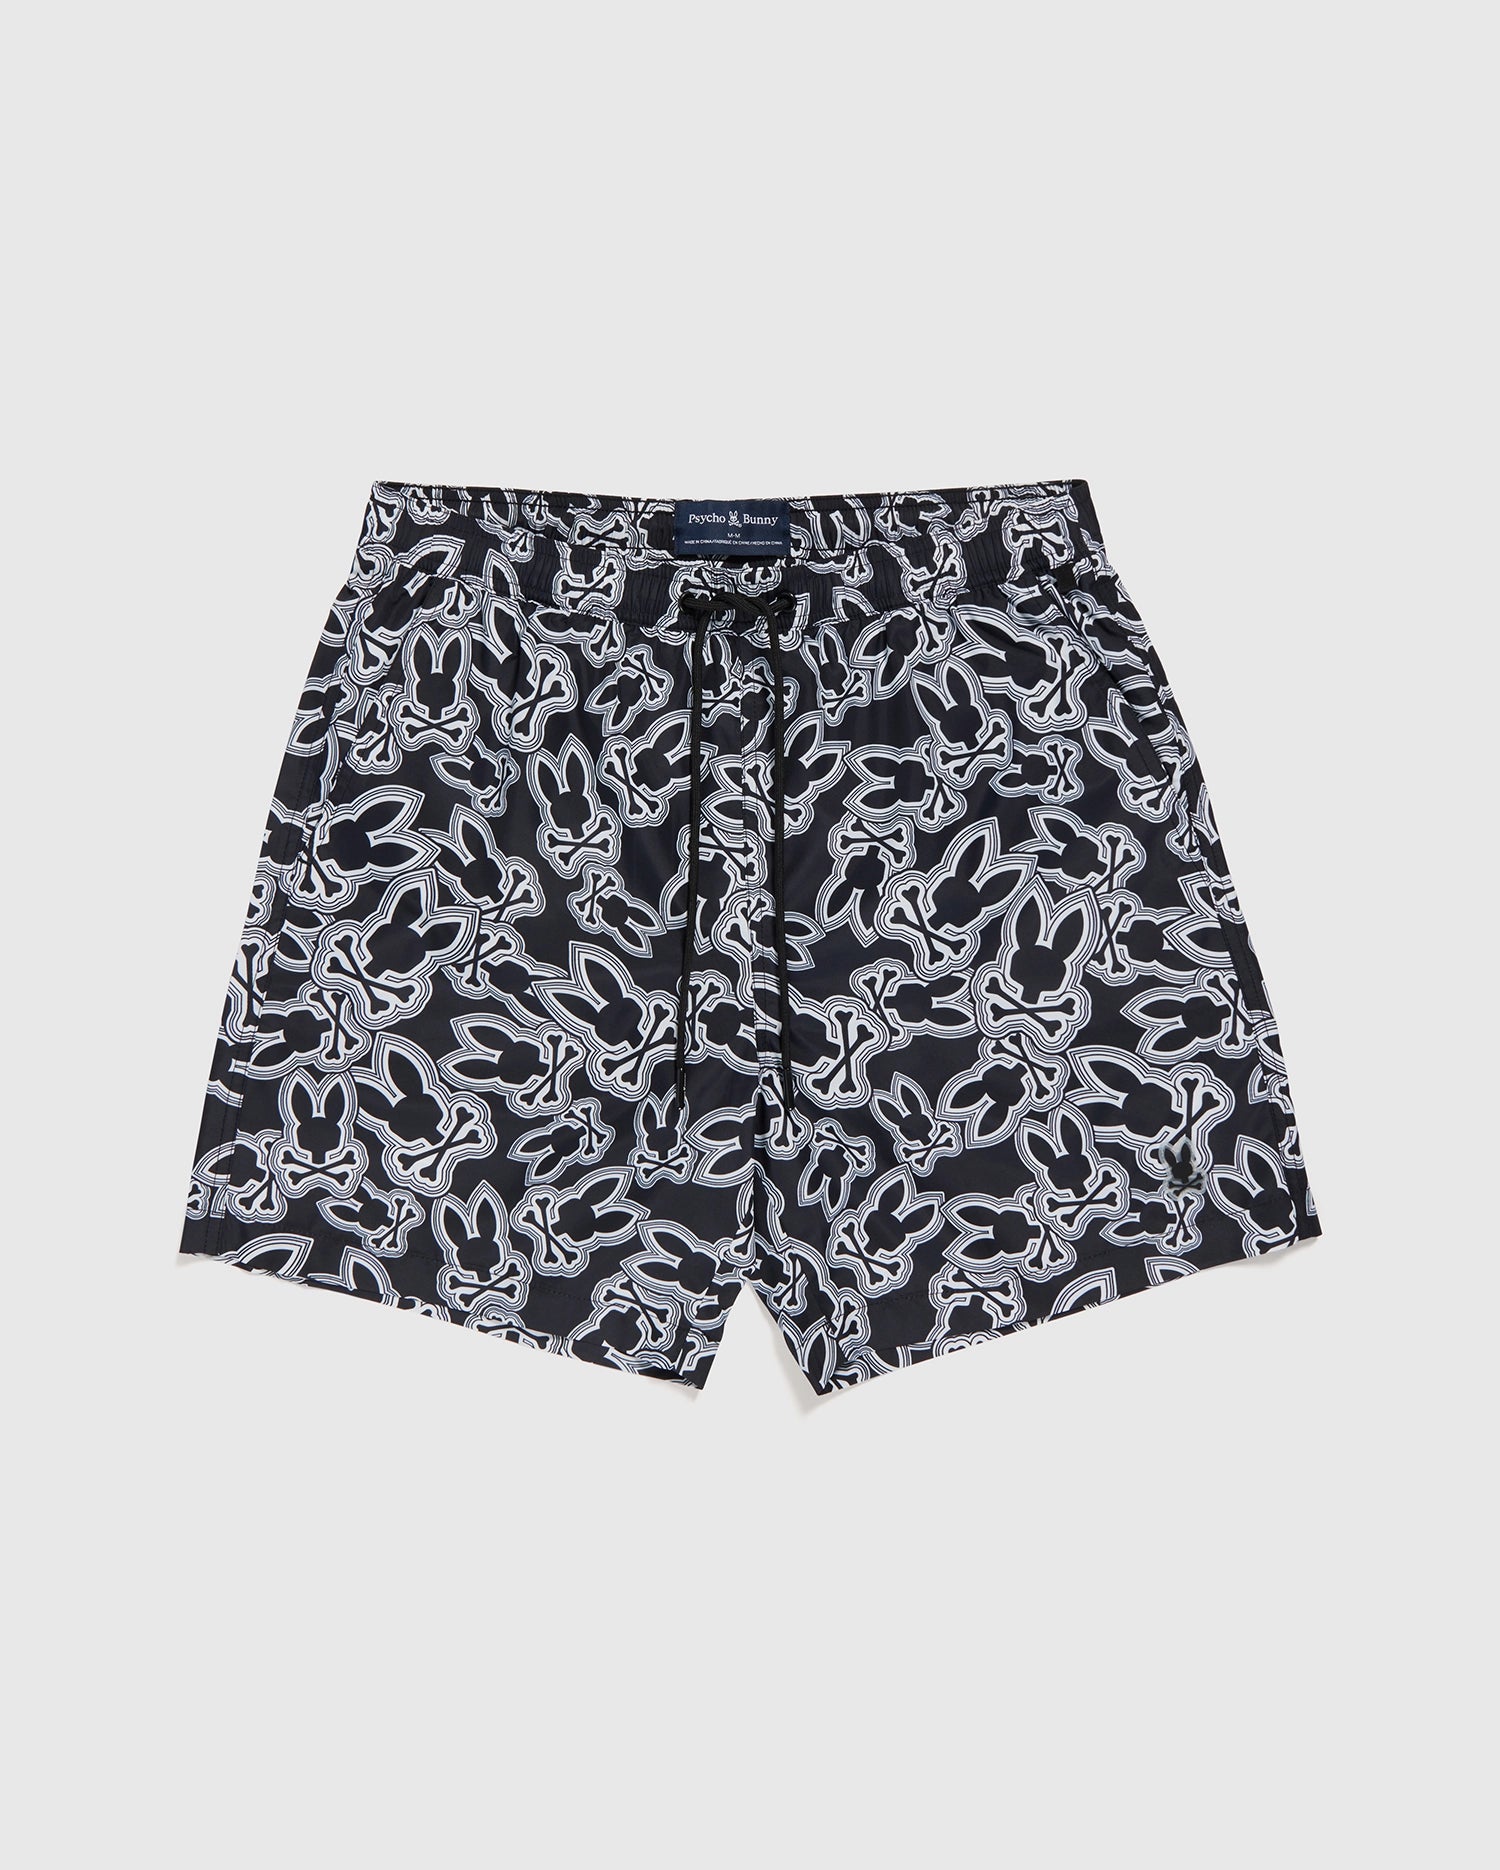 Swim trunks with a dark blue base and white tropical floral patterns, crafted from recycled polyester, displayed flat on a white background. Psycho Bunny's MENS MAYBROOK LIGHTWEIGHT SWIM TRUNK - B6W119B2SW.